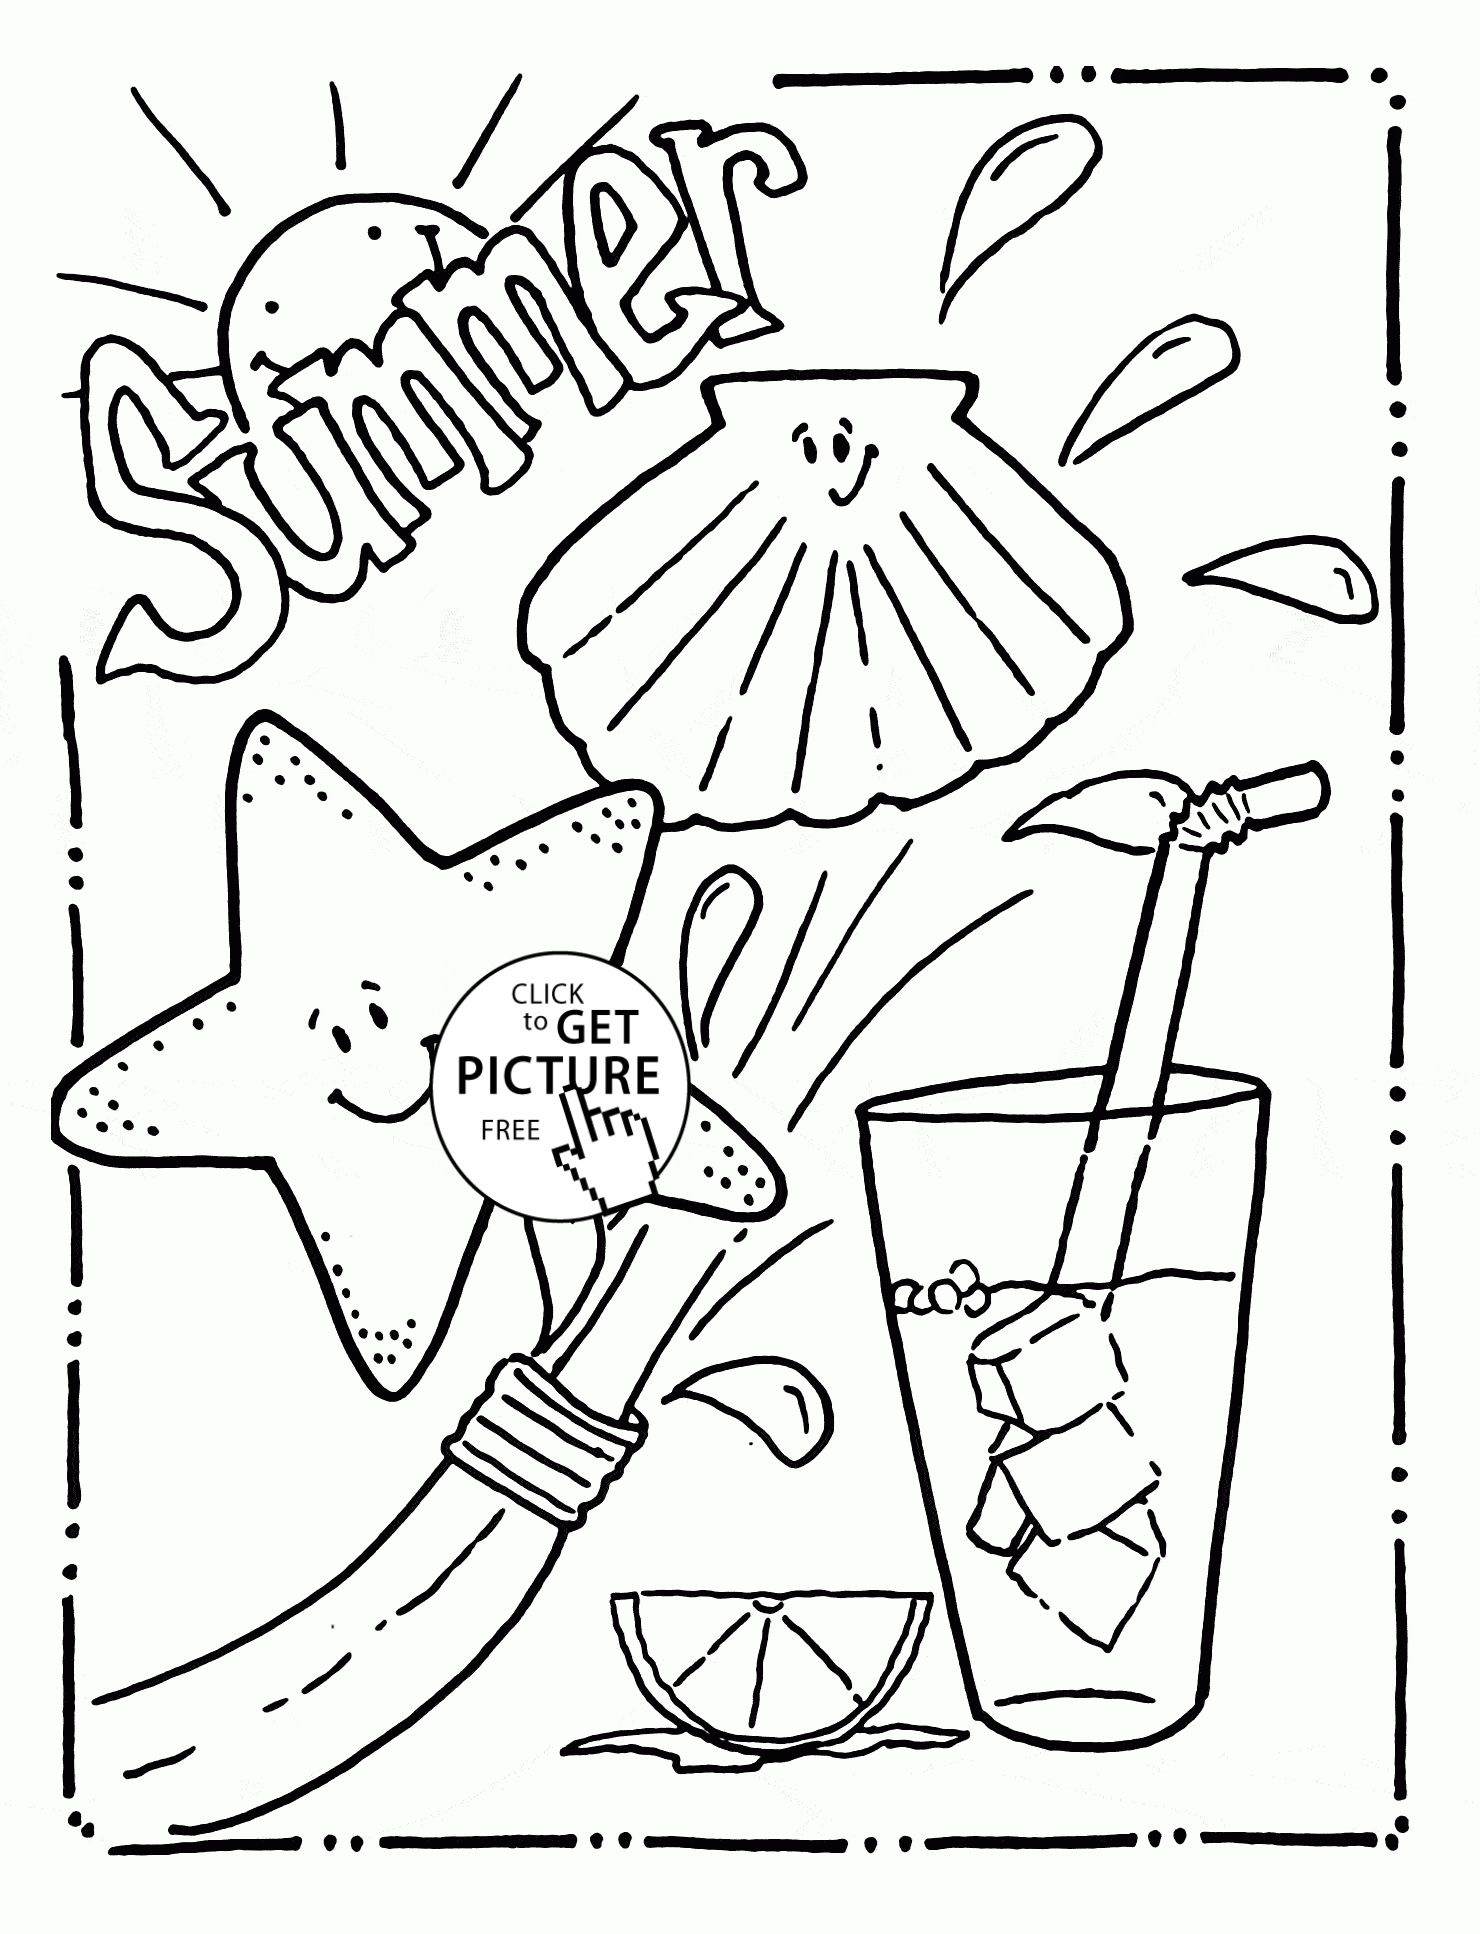 Full Page Childrens Coloring Pages 10